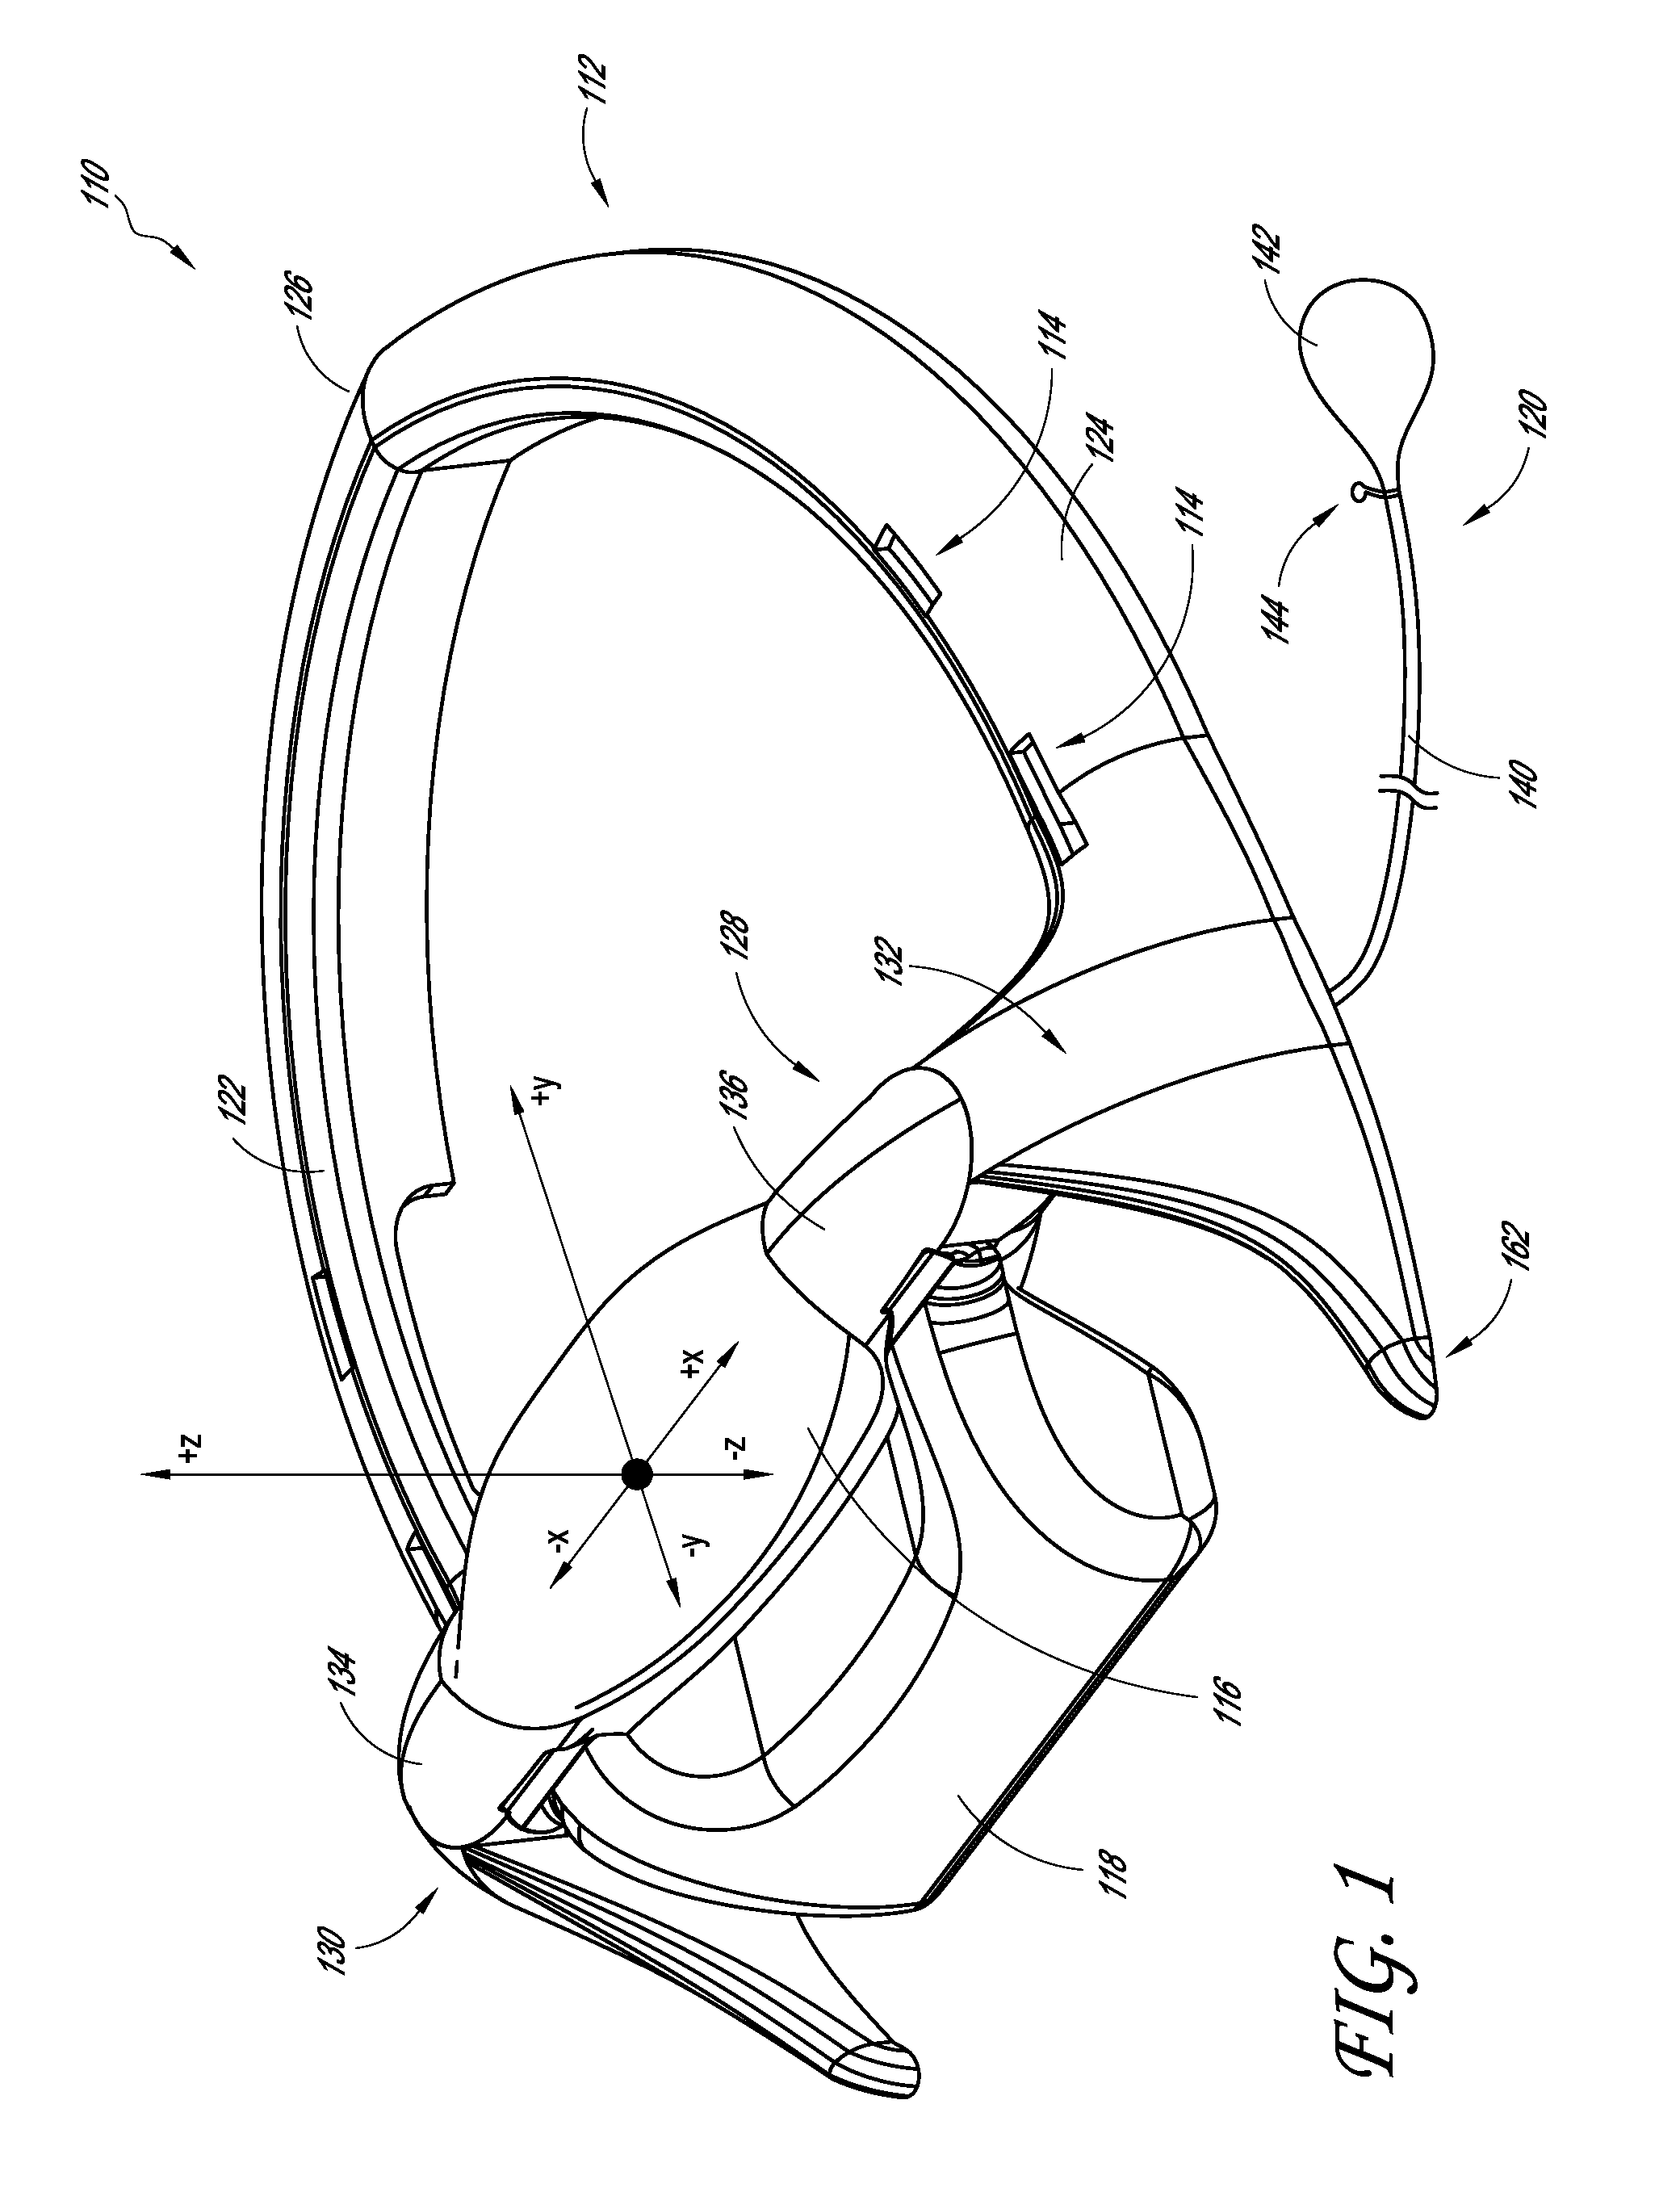 Systems and methods for decompression and elliptical traction of the cervical and thoracic spine